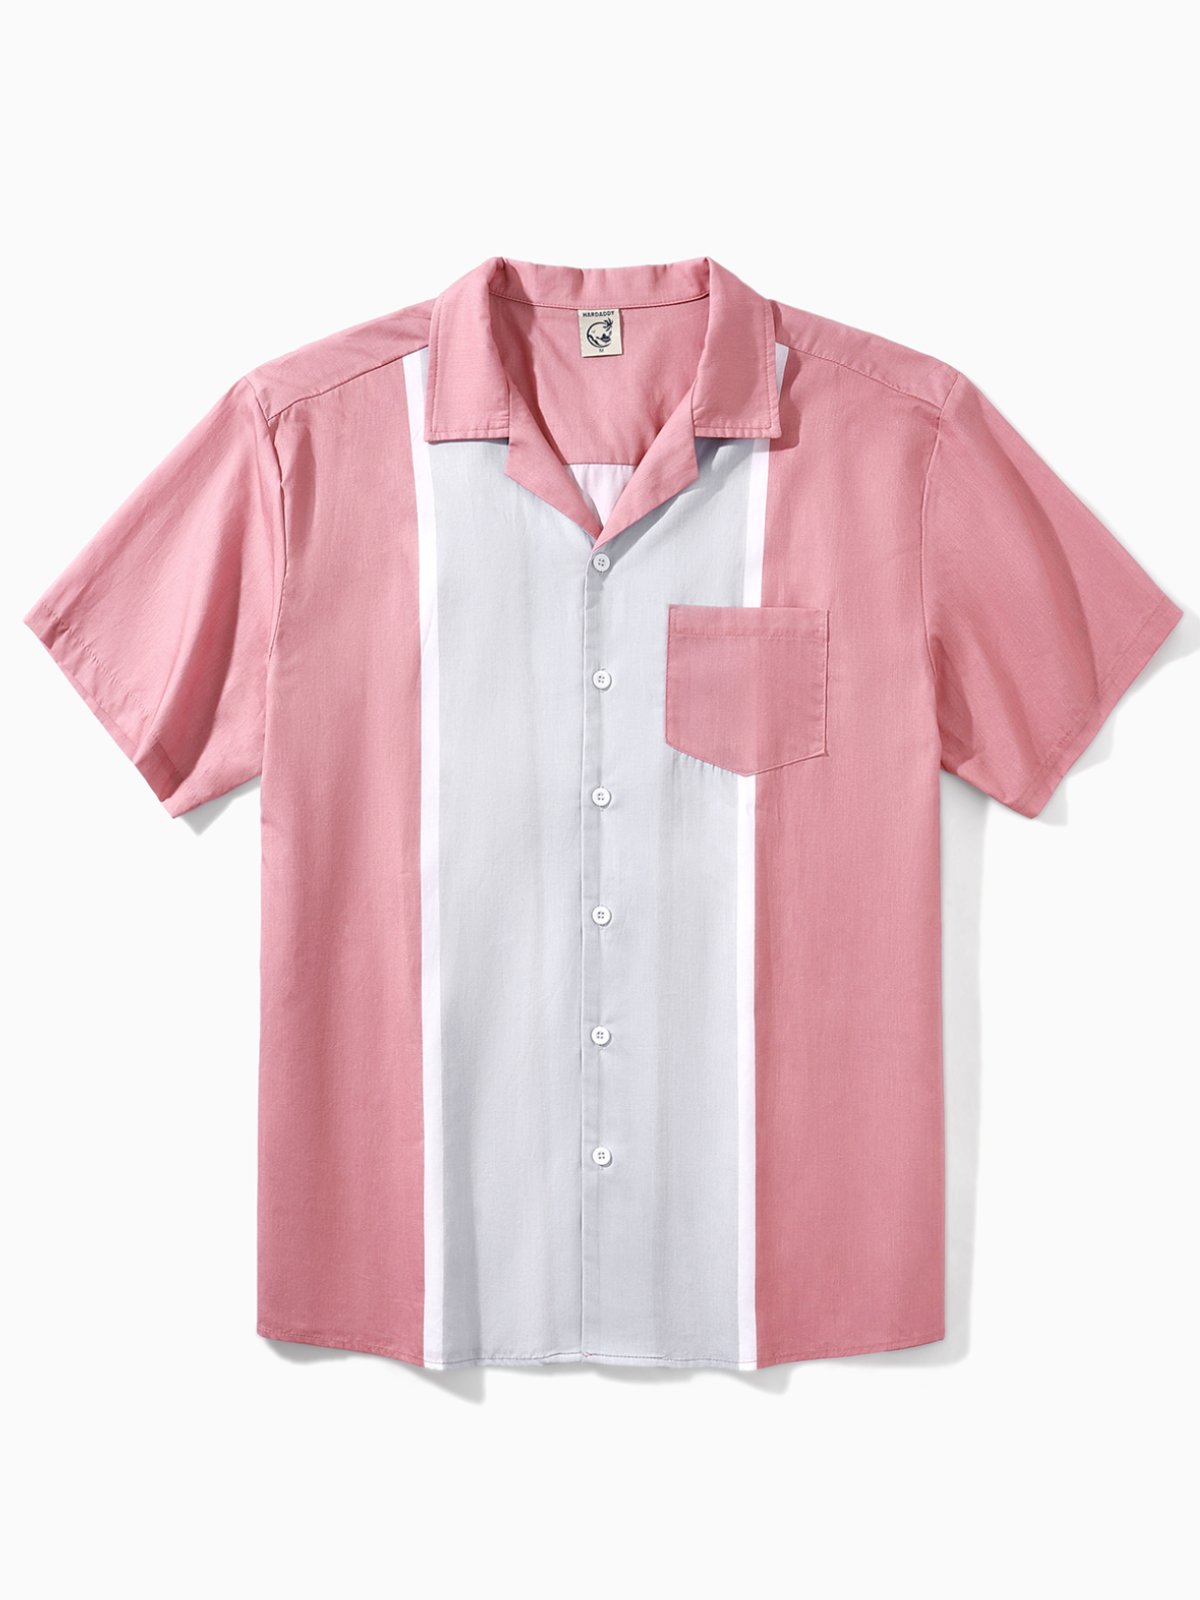 Hardaddy® Cotton Color Block Chest Pocket Bowling Shirt